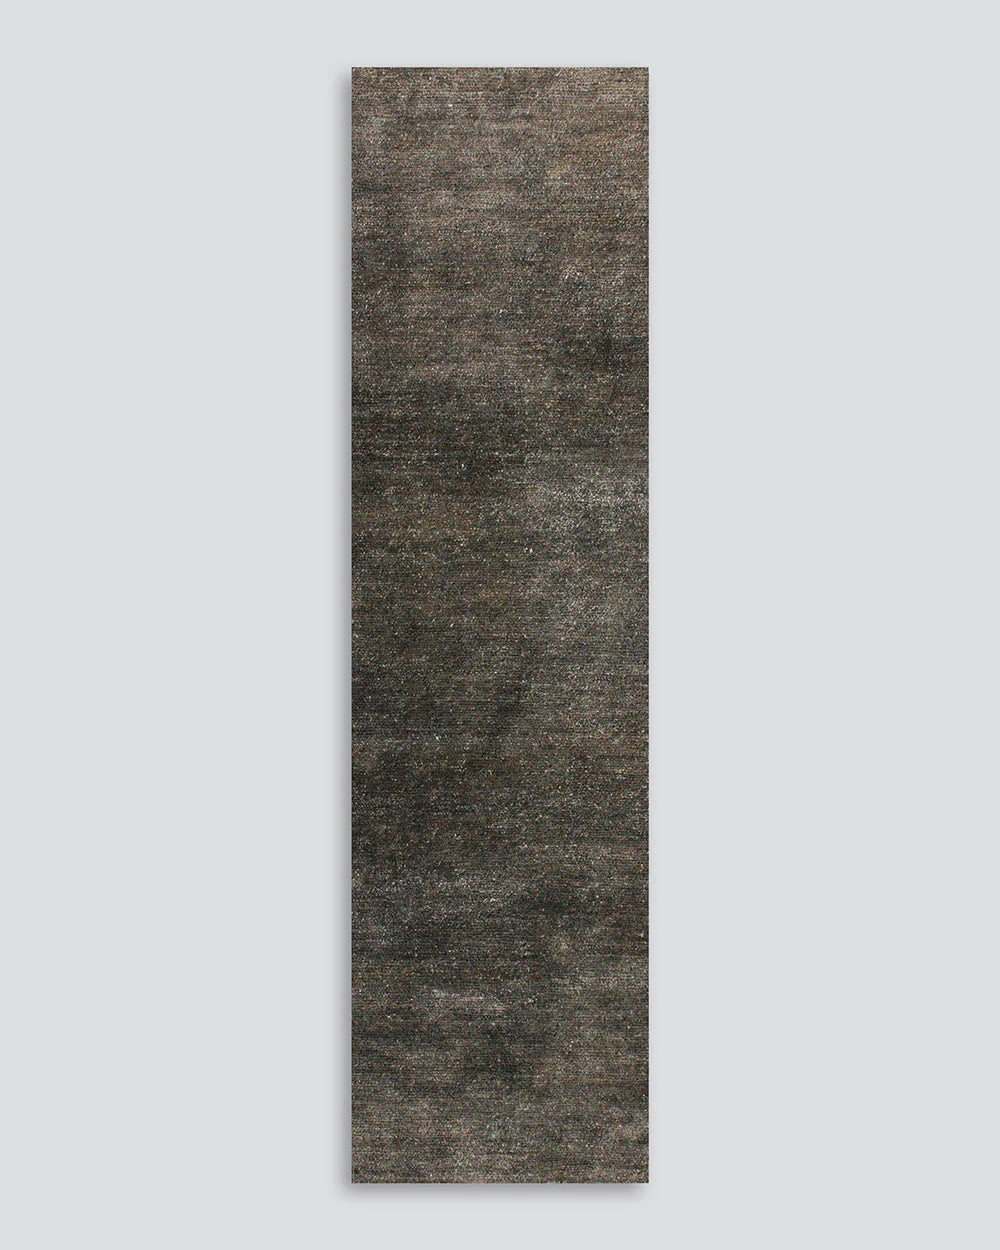 Anchorage Gravel Floor Runner from Baya Furtex Stockist Make Your House A Home, Furniture Store Bendigo. Free Australia Wide Delivery. Mulberi Rugs.